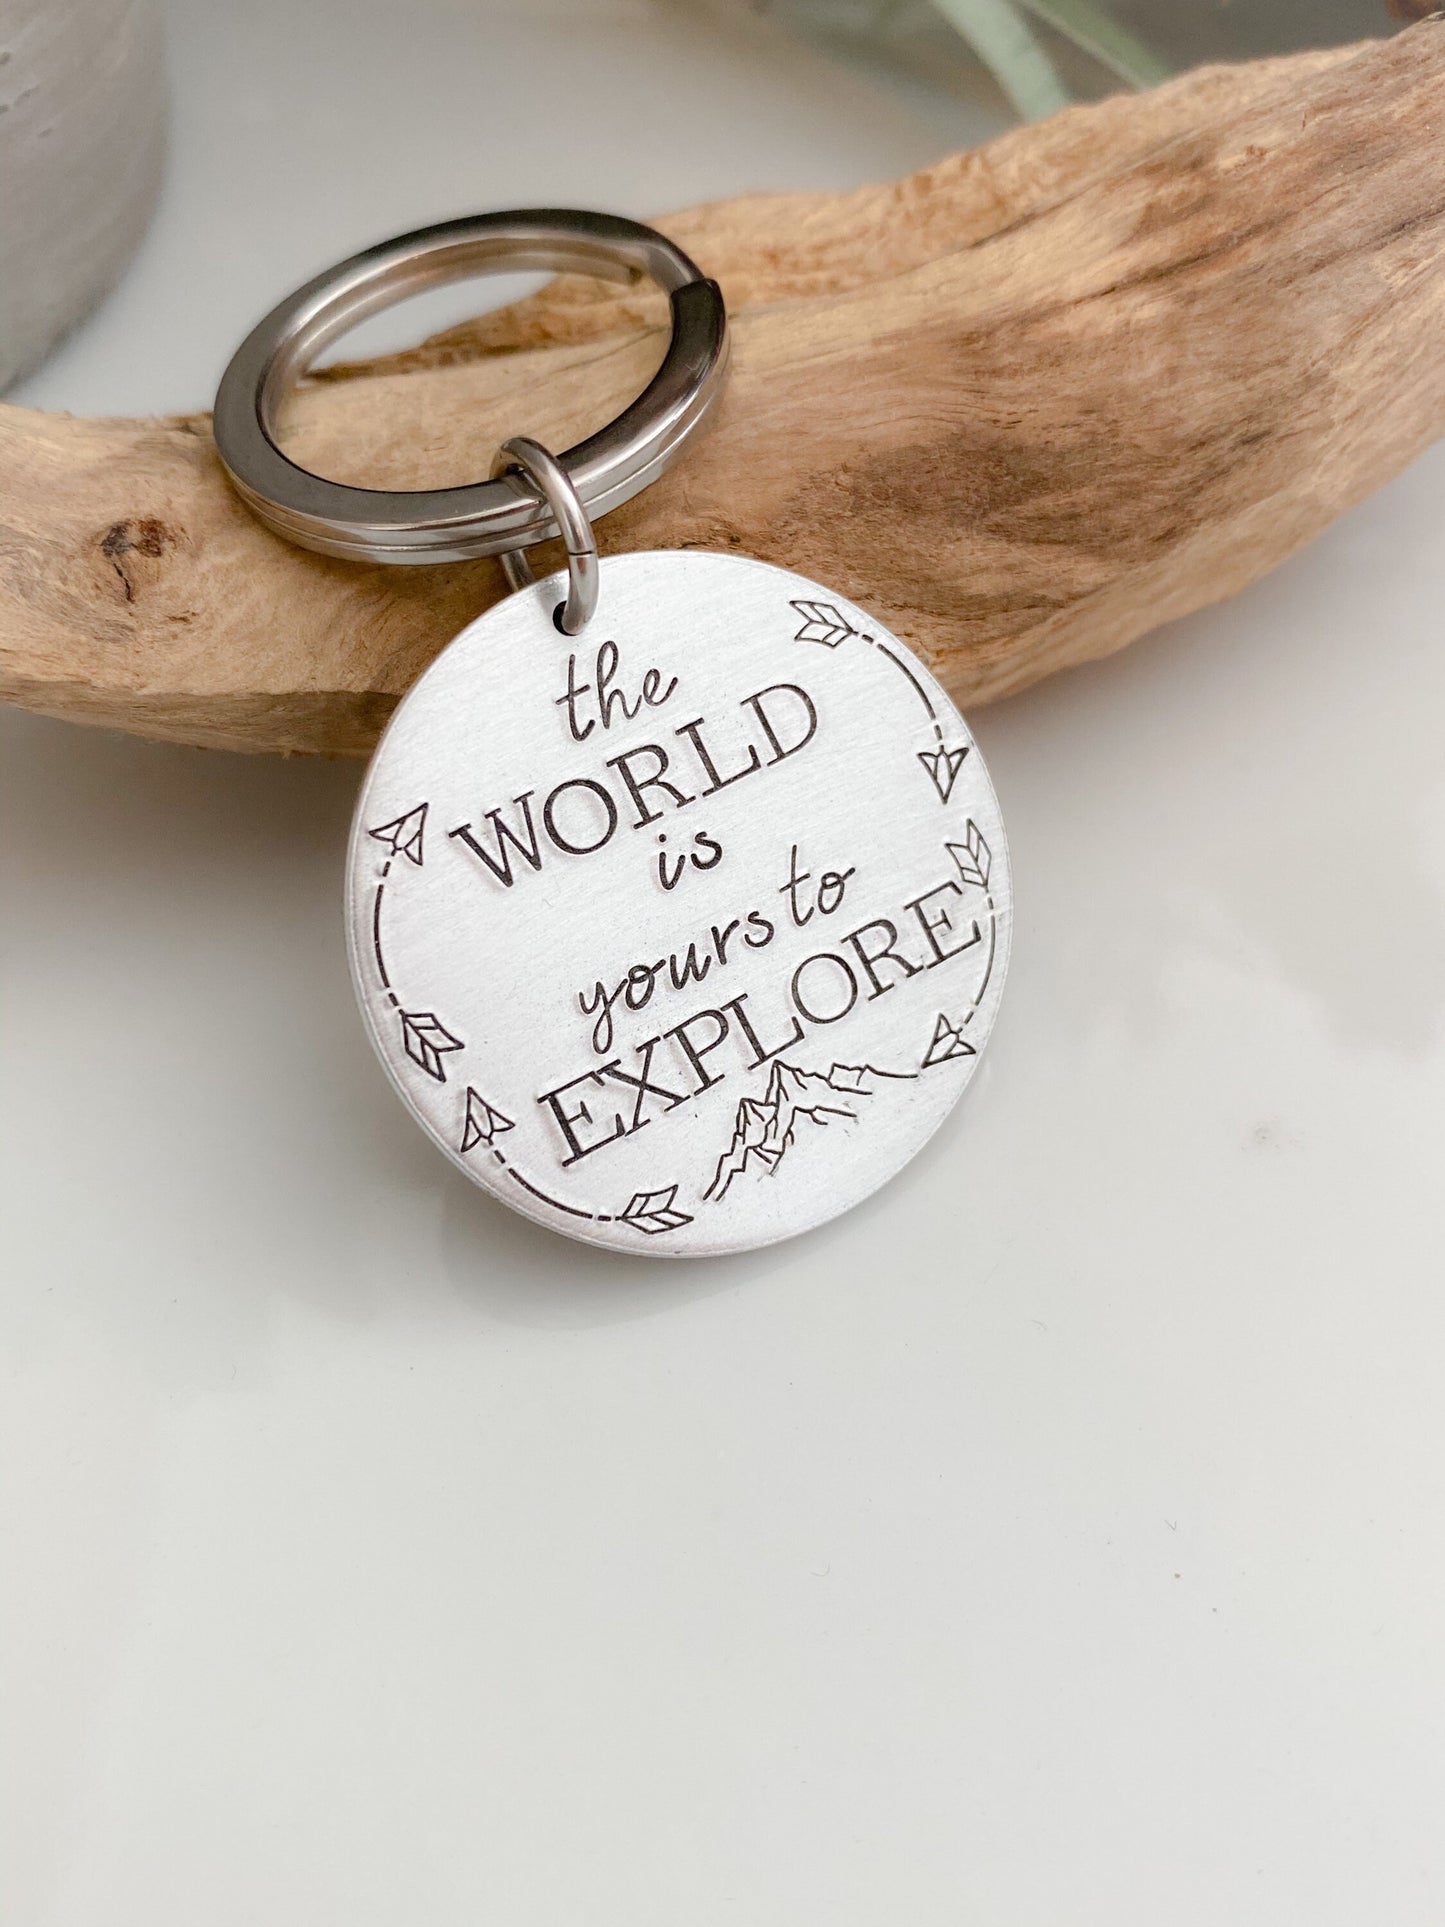 The World is Yours to Explore Keychain--New Driver--Graduation Gift--Mountain Keychain--Hand Stamped Key Chain--World Traveler Gift